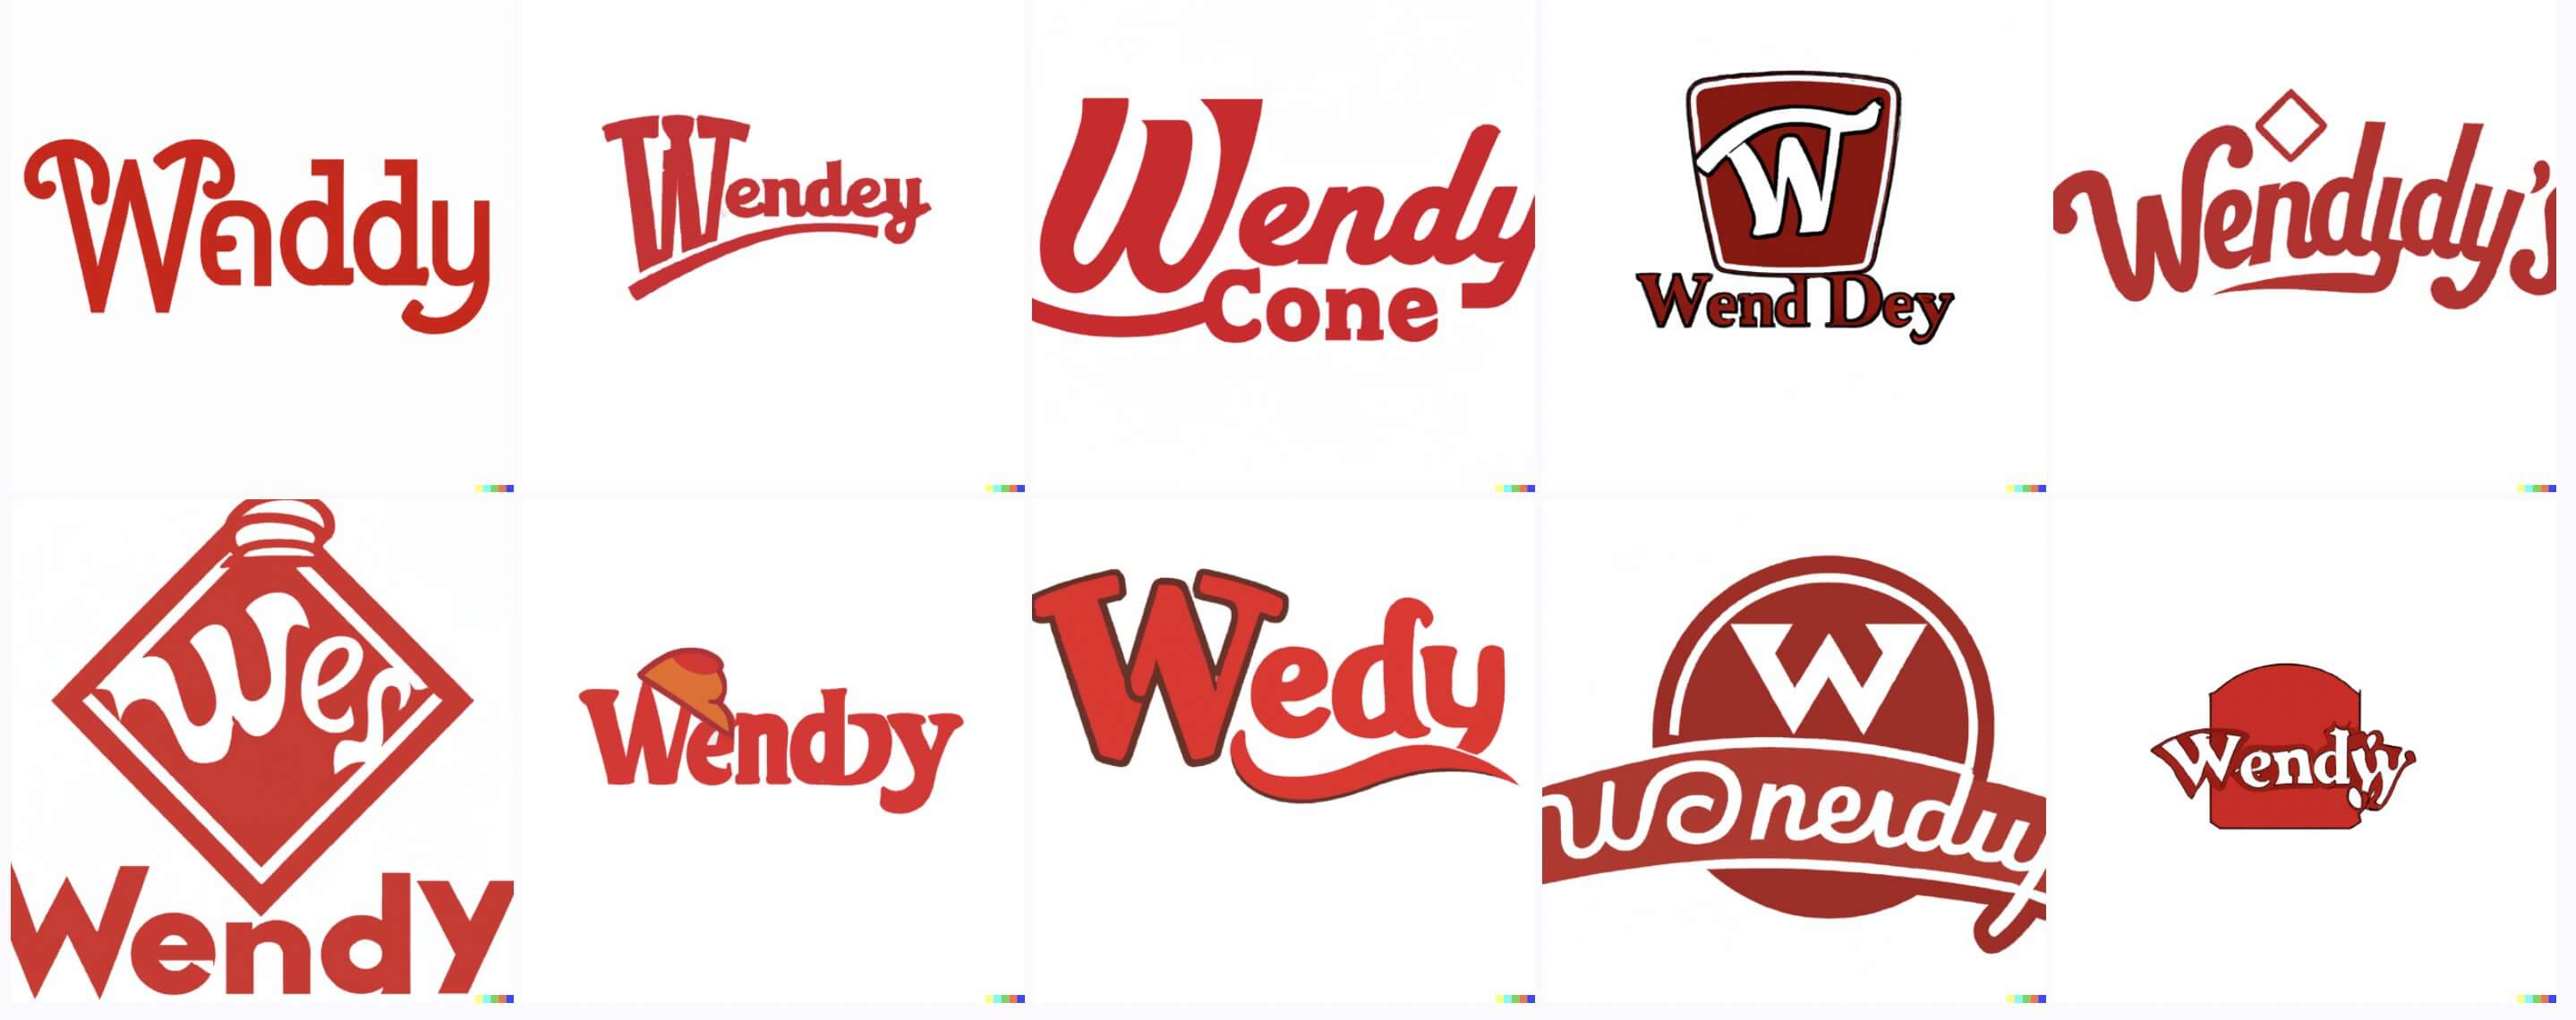 Wendy’s logo generated by Dalle